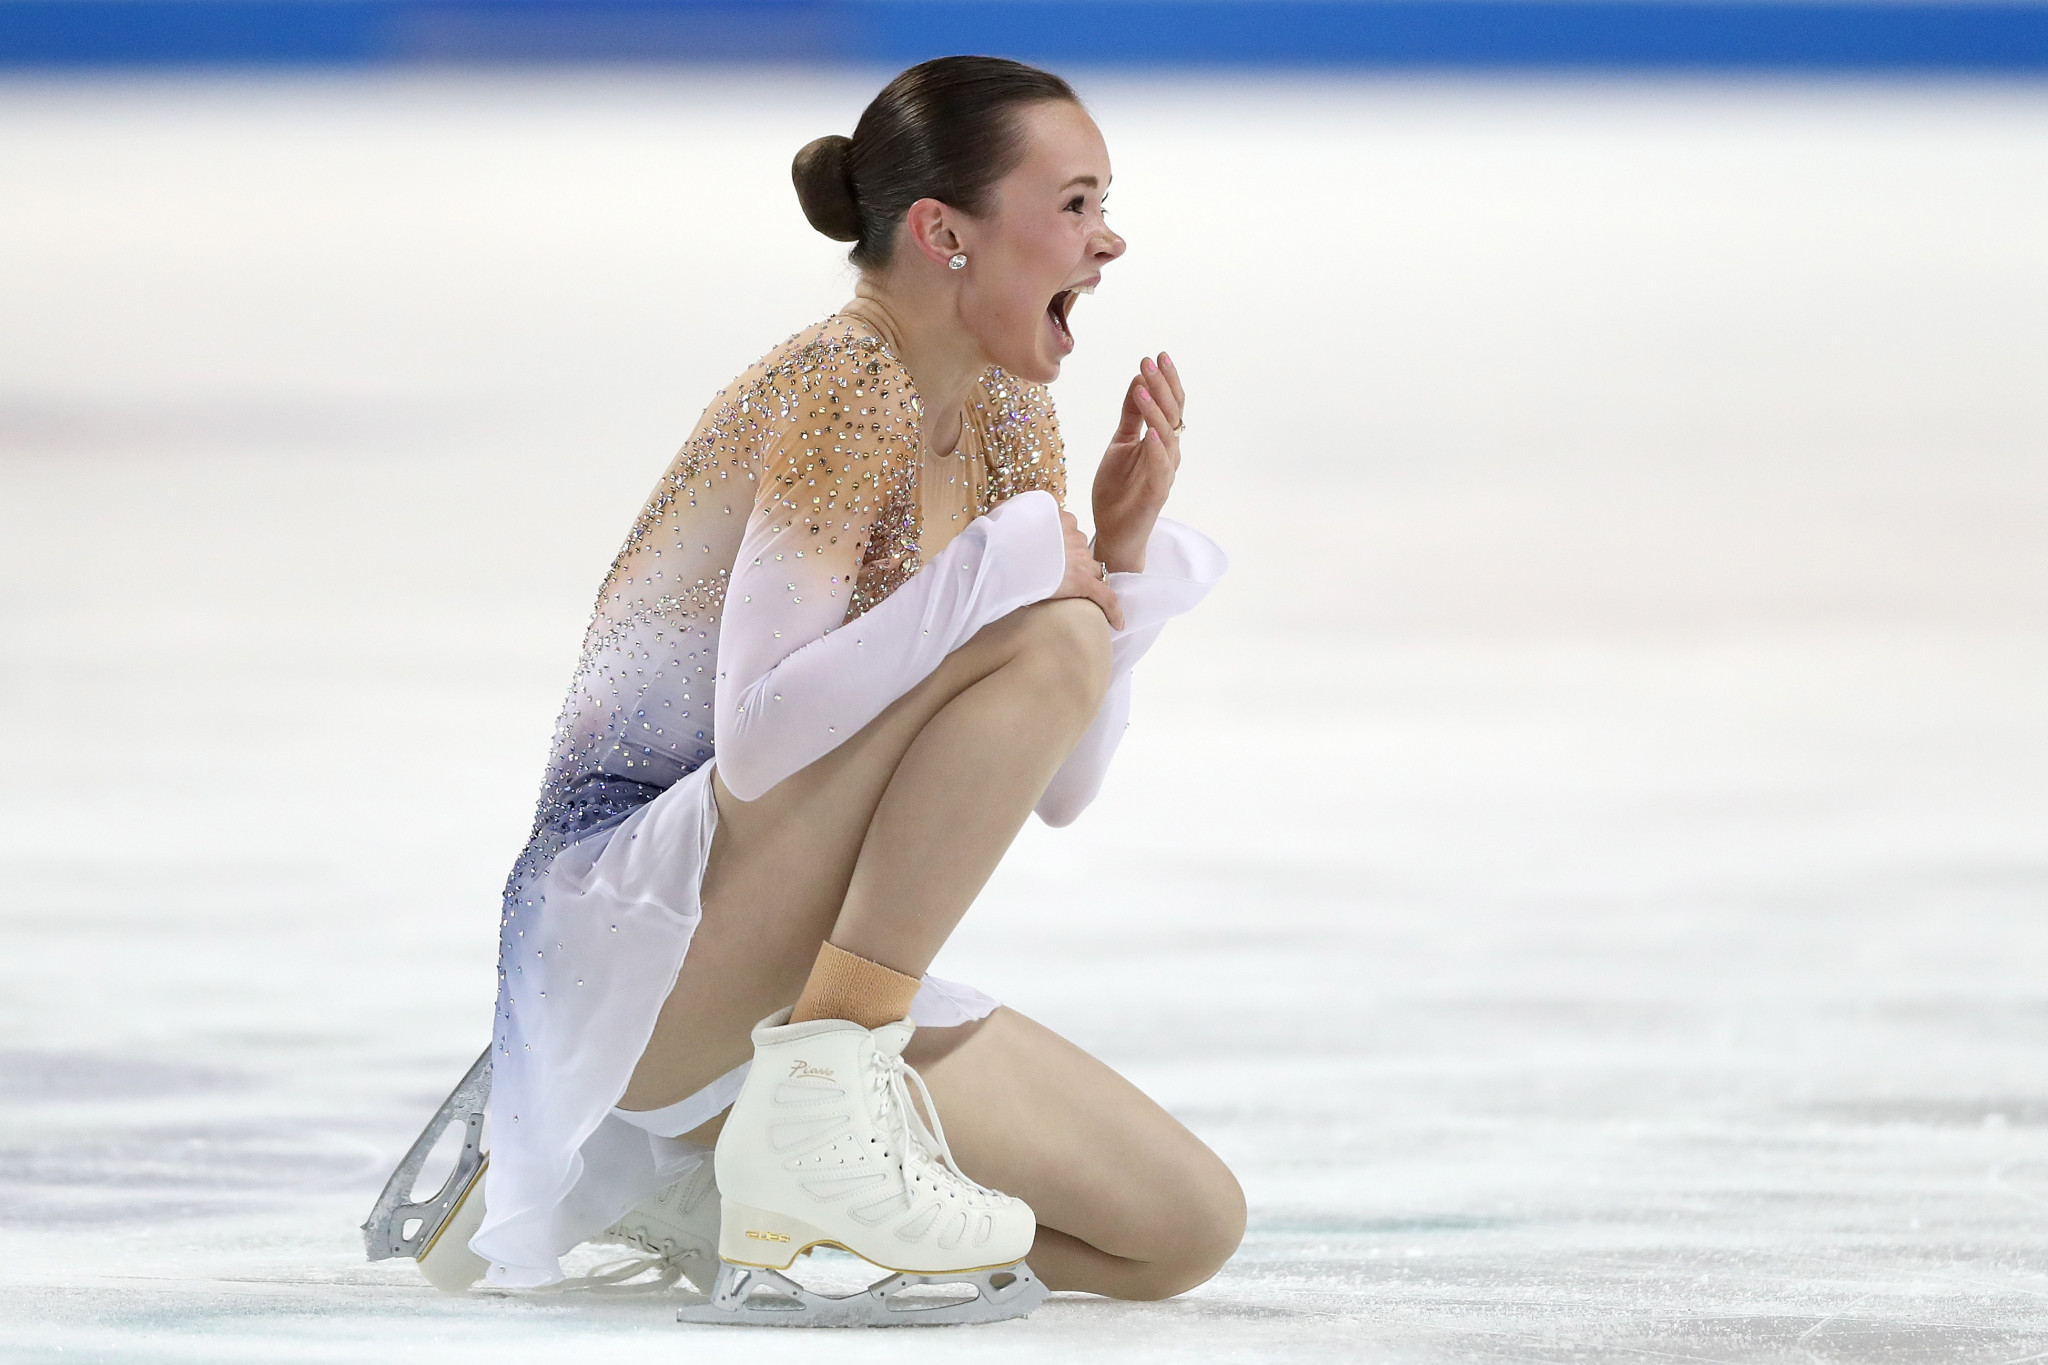 Mariah Bell triumphed in the women's online competition set up by US Figure Skating ©Getty Images